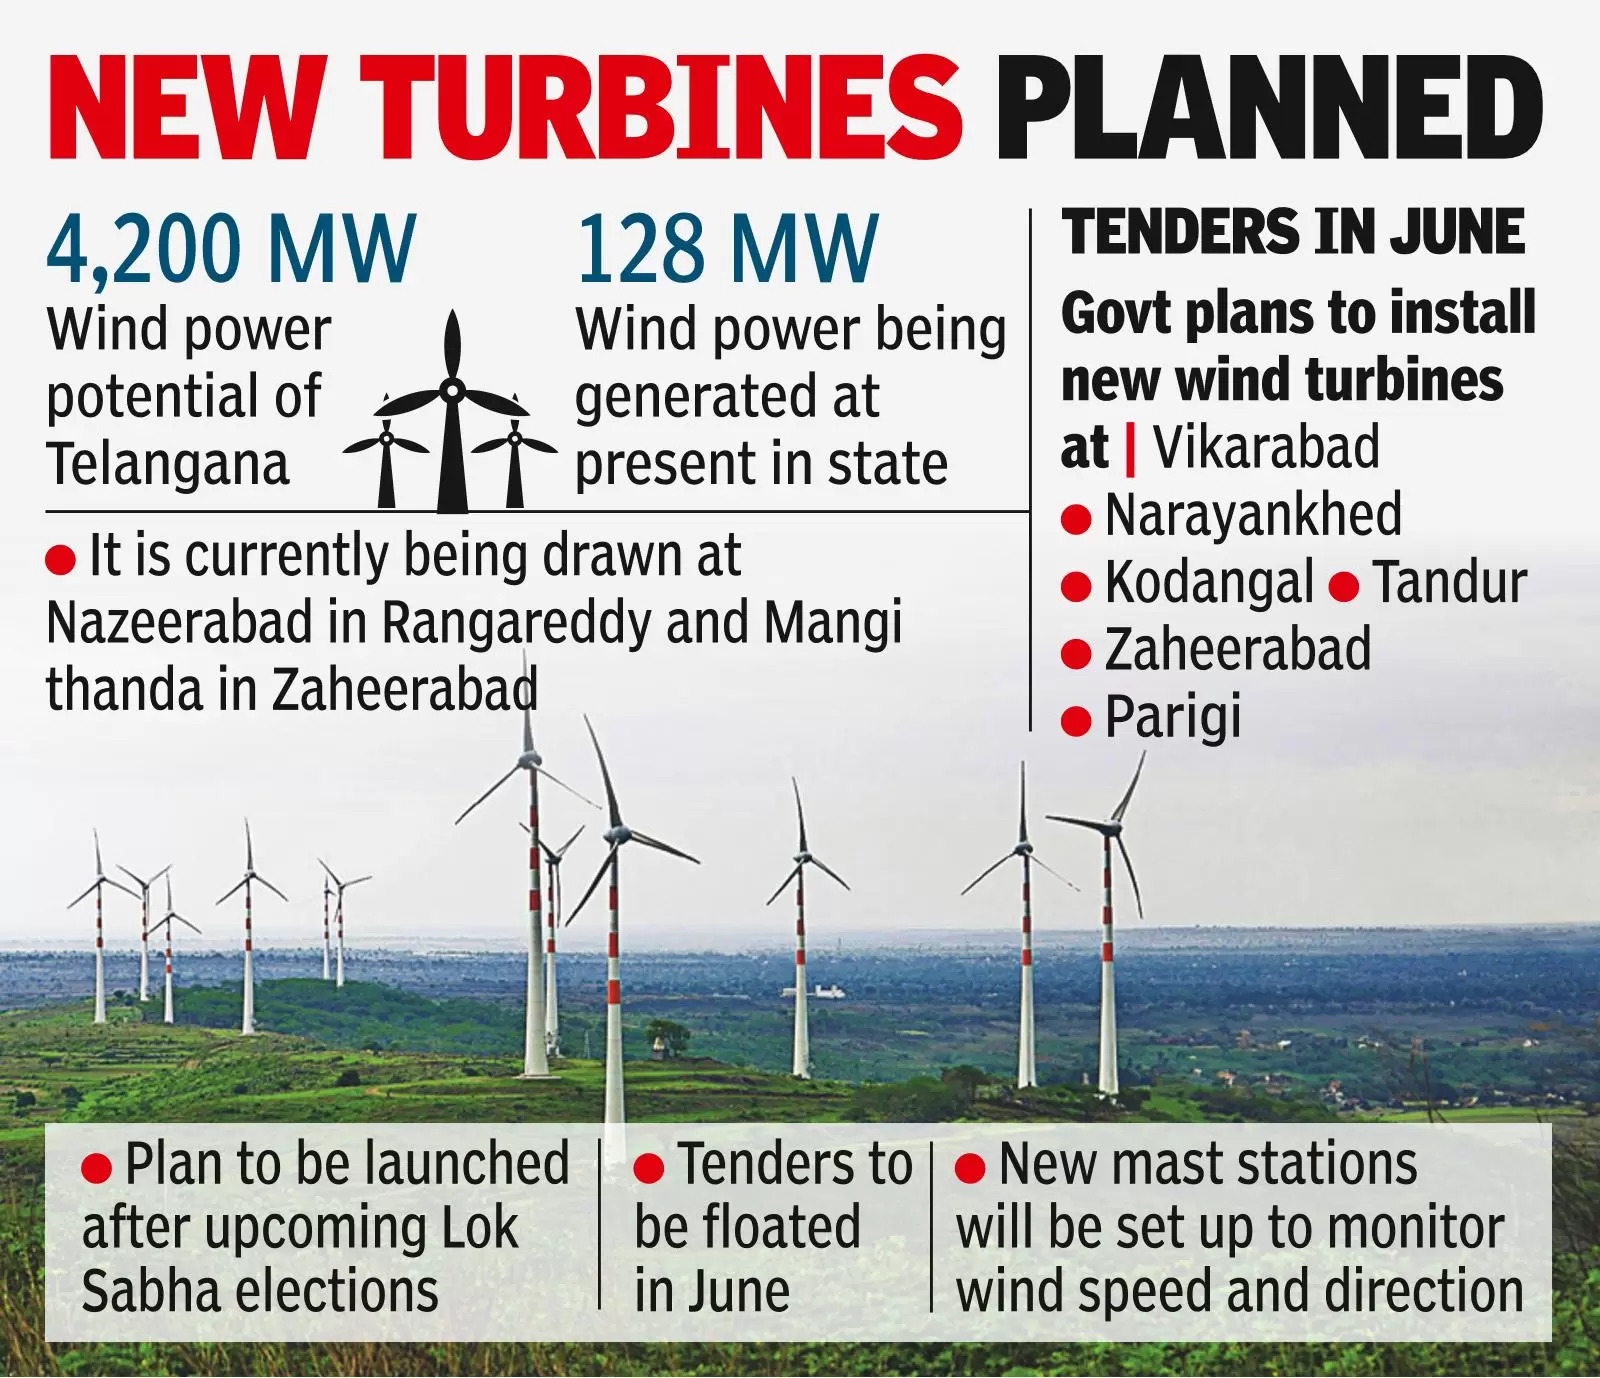 T has potential to produce 4k MW wind energy: Study